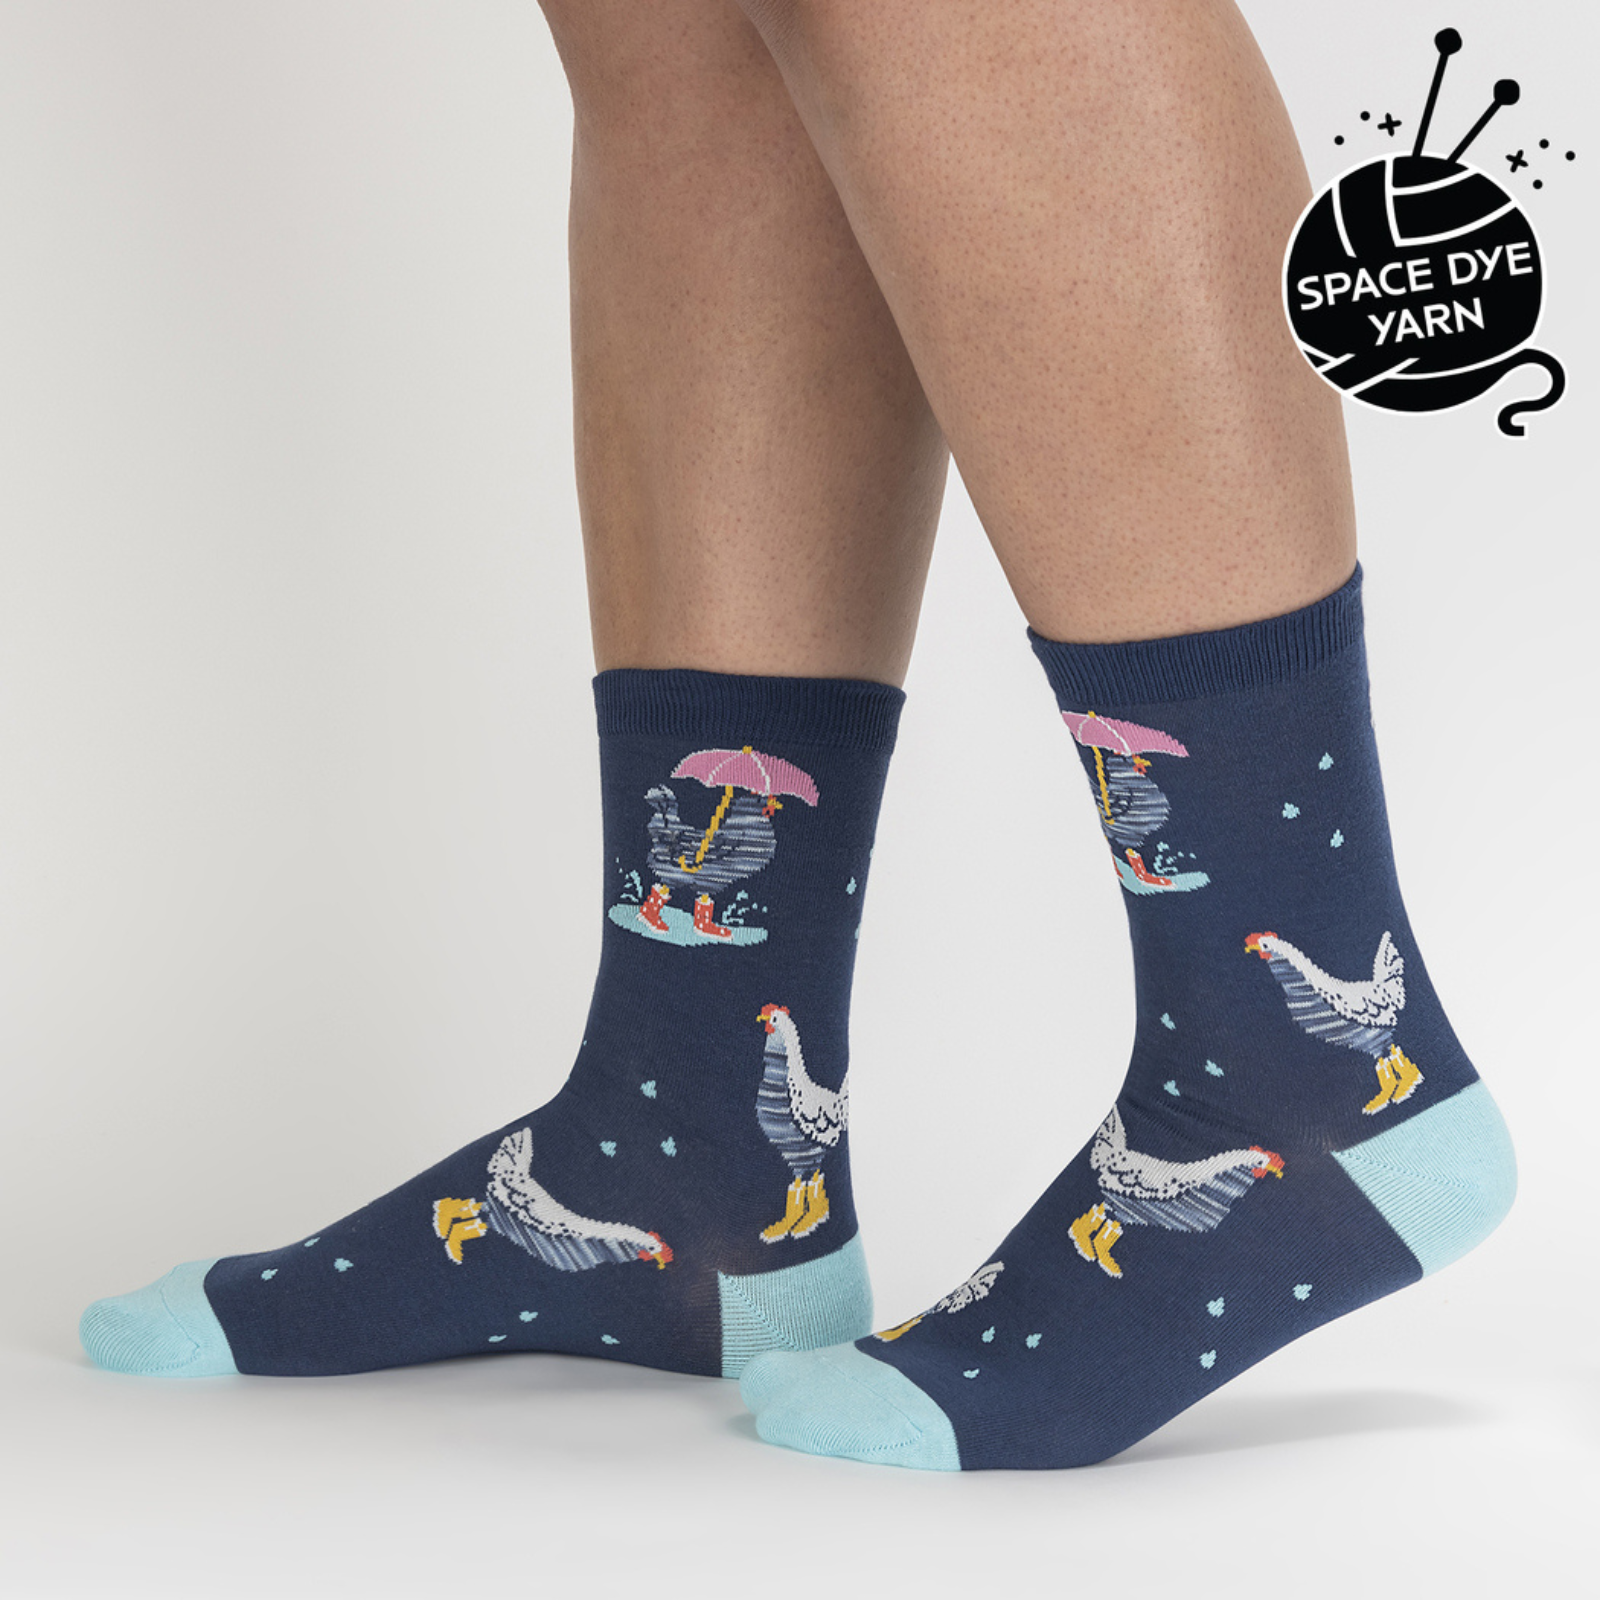 Sock It To Me Chicken Little women's crew sock featuring blue sock with light blue heel and toe with chickens in the rain all over. Socks worn by model seen from side. 